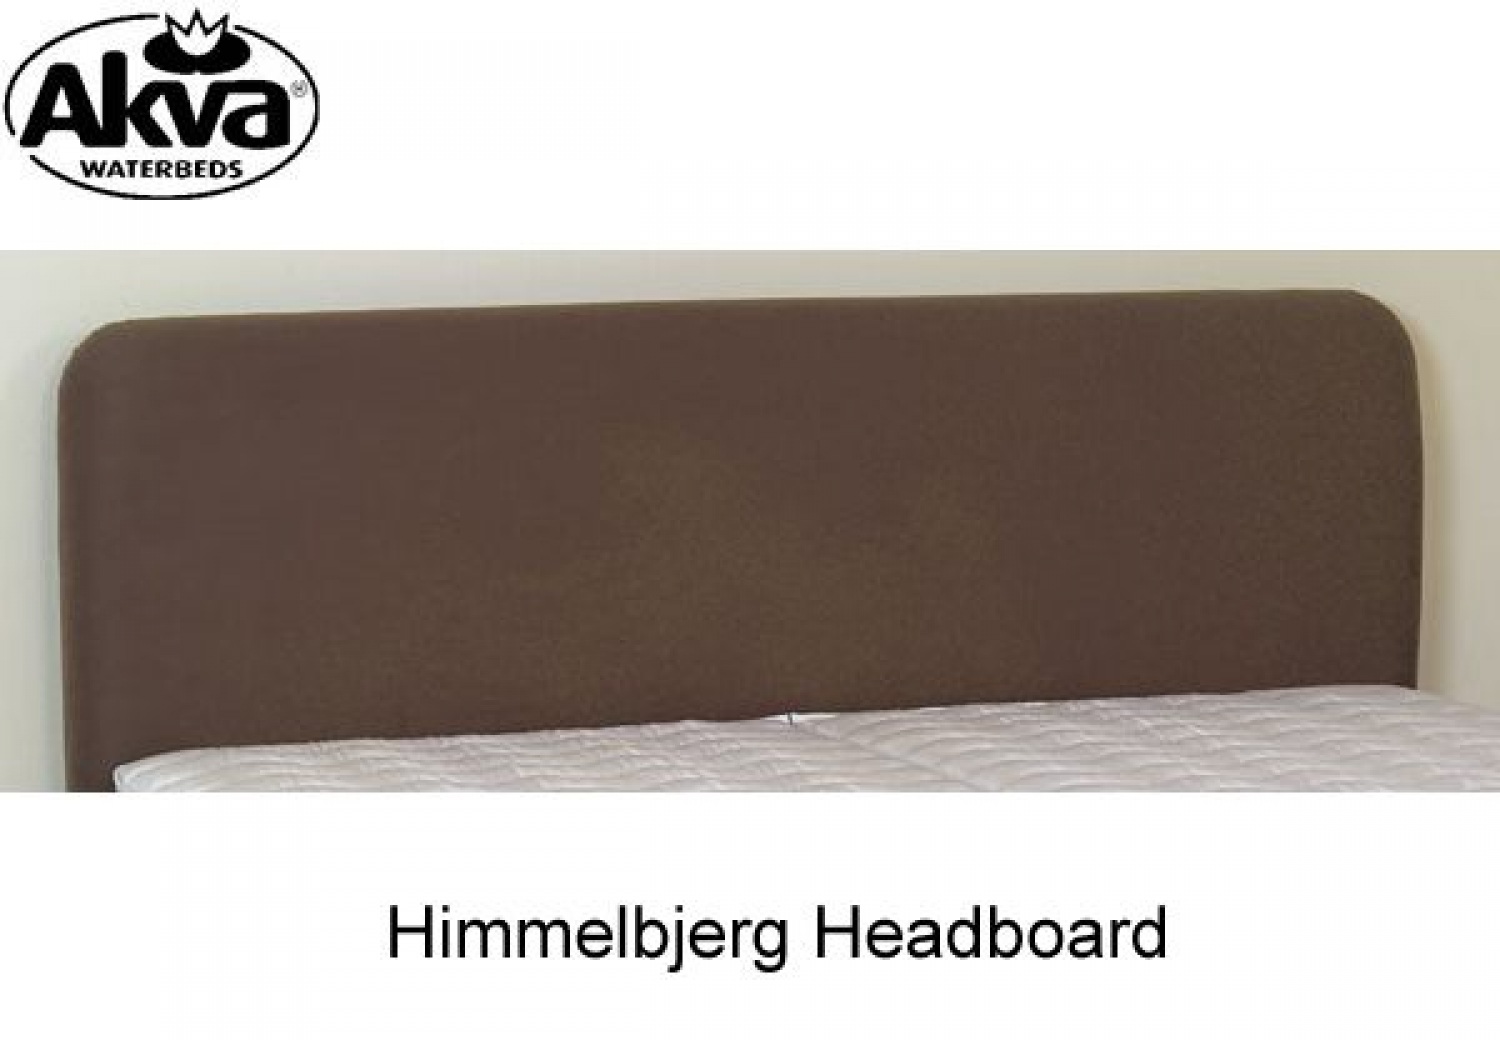 Akva Waterbed Mini Himmelbjerg Headboard has various fabric and leather collection image